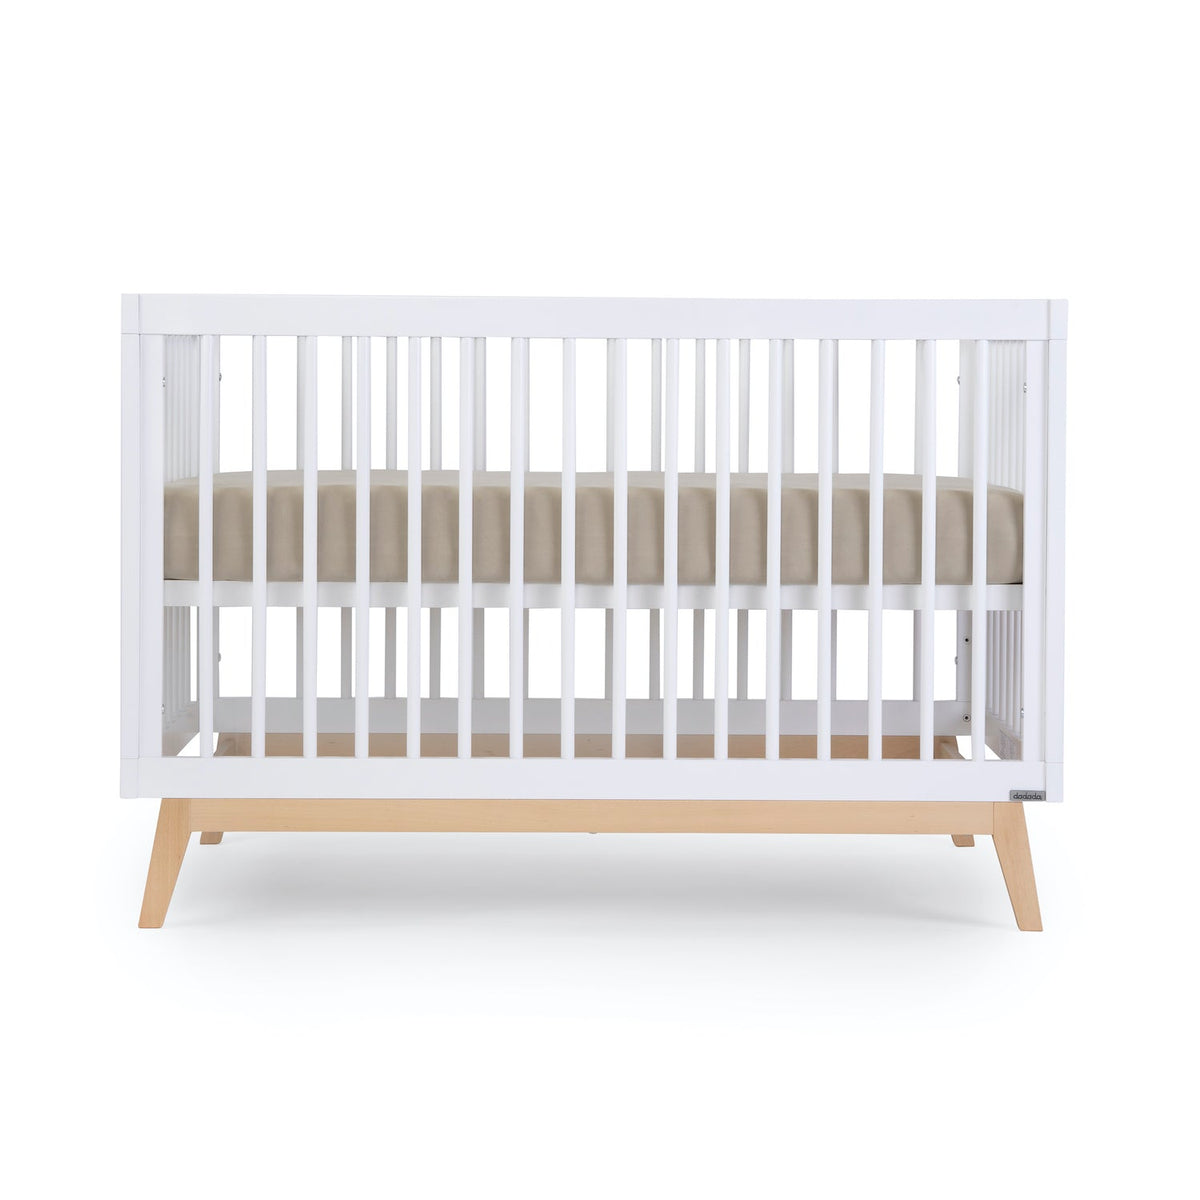 Soho 3-in-1 Convertible Crib - White/Natural - Project Nursery